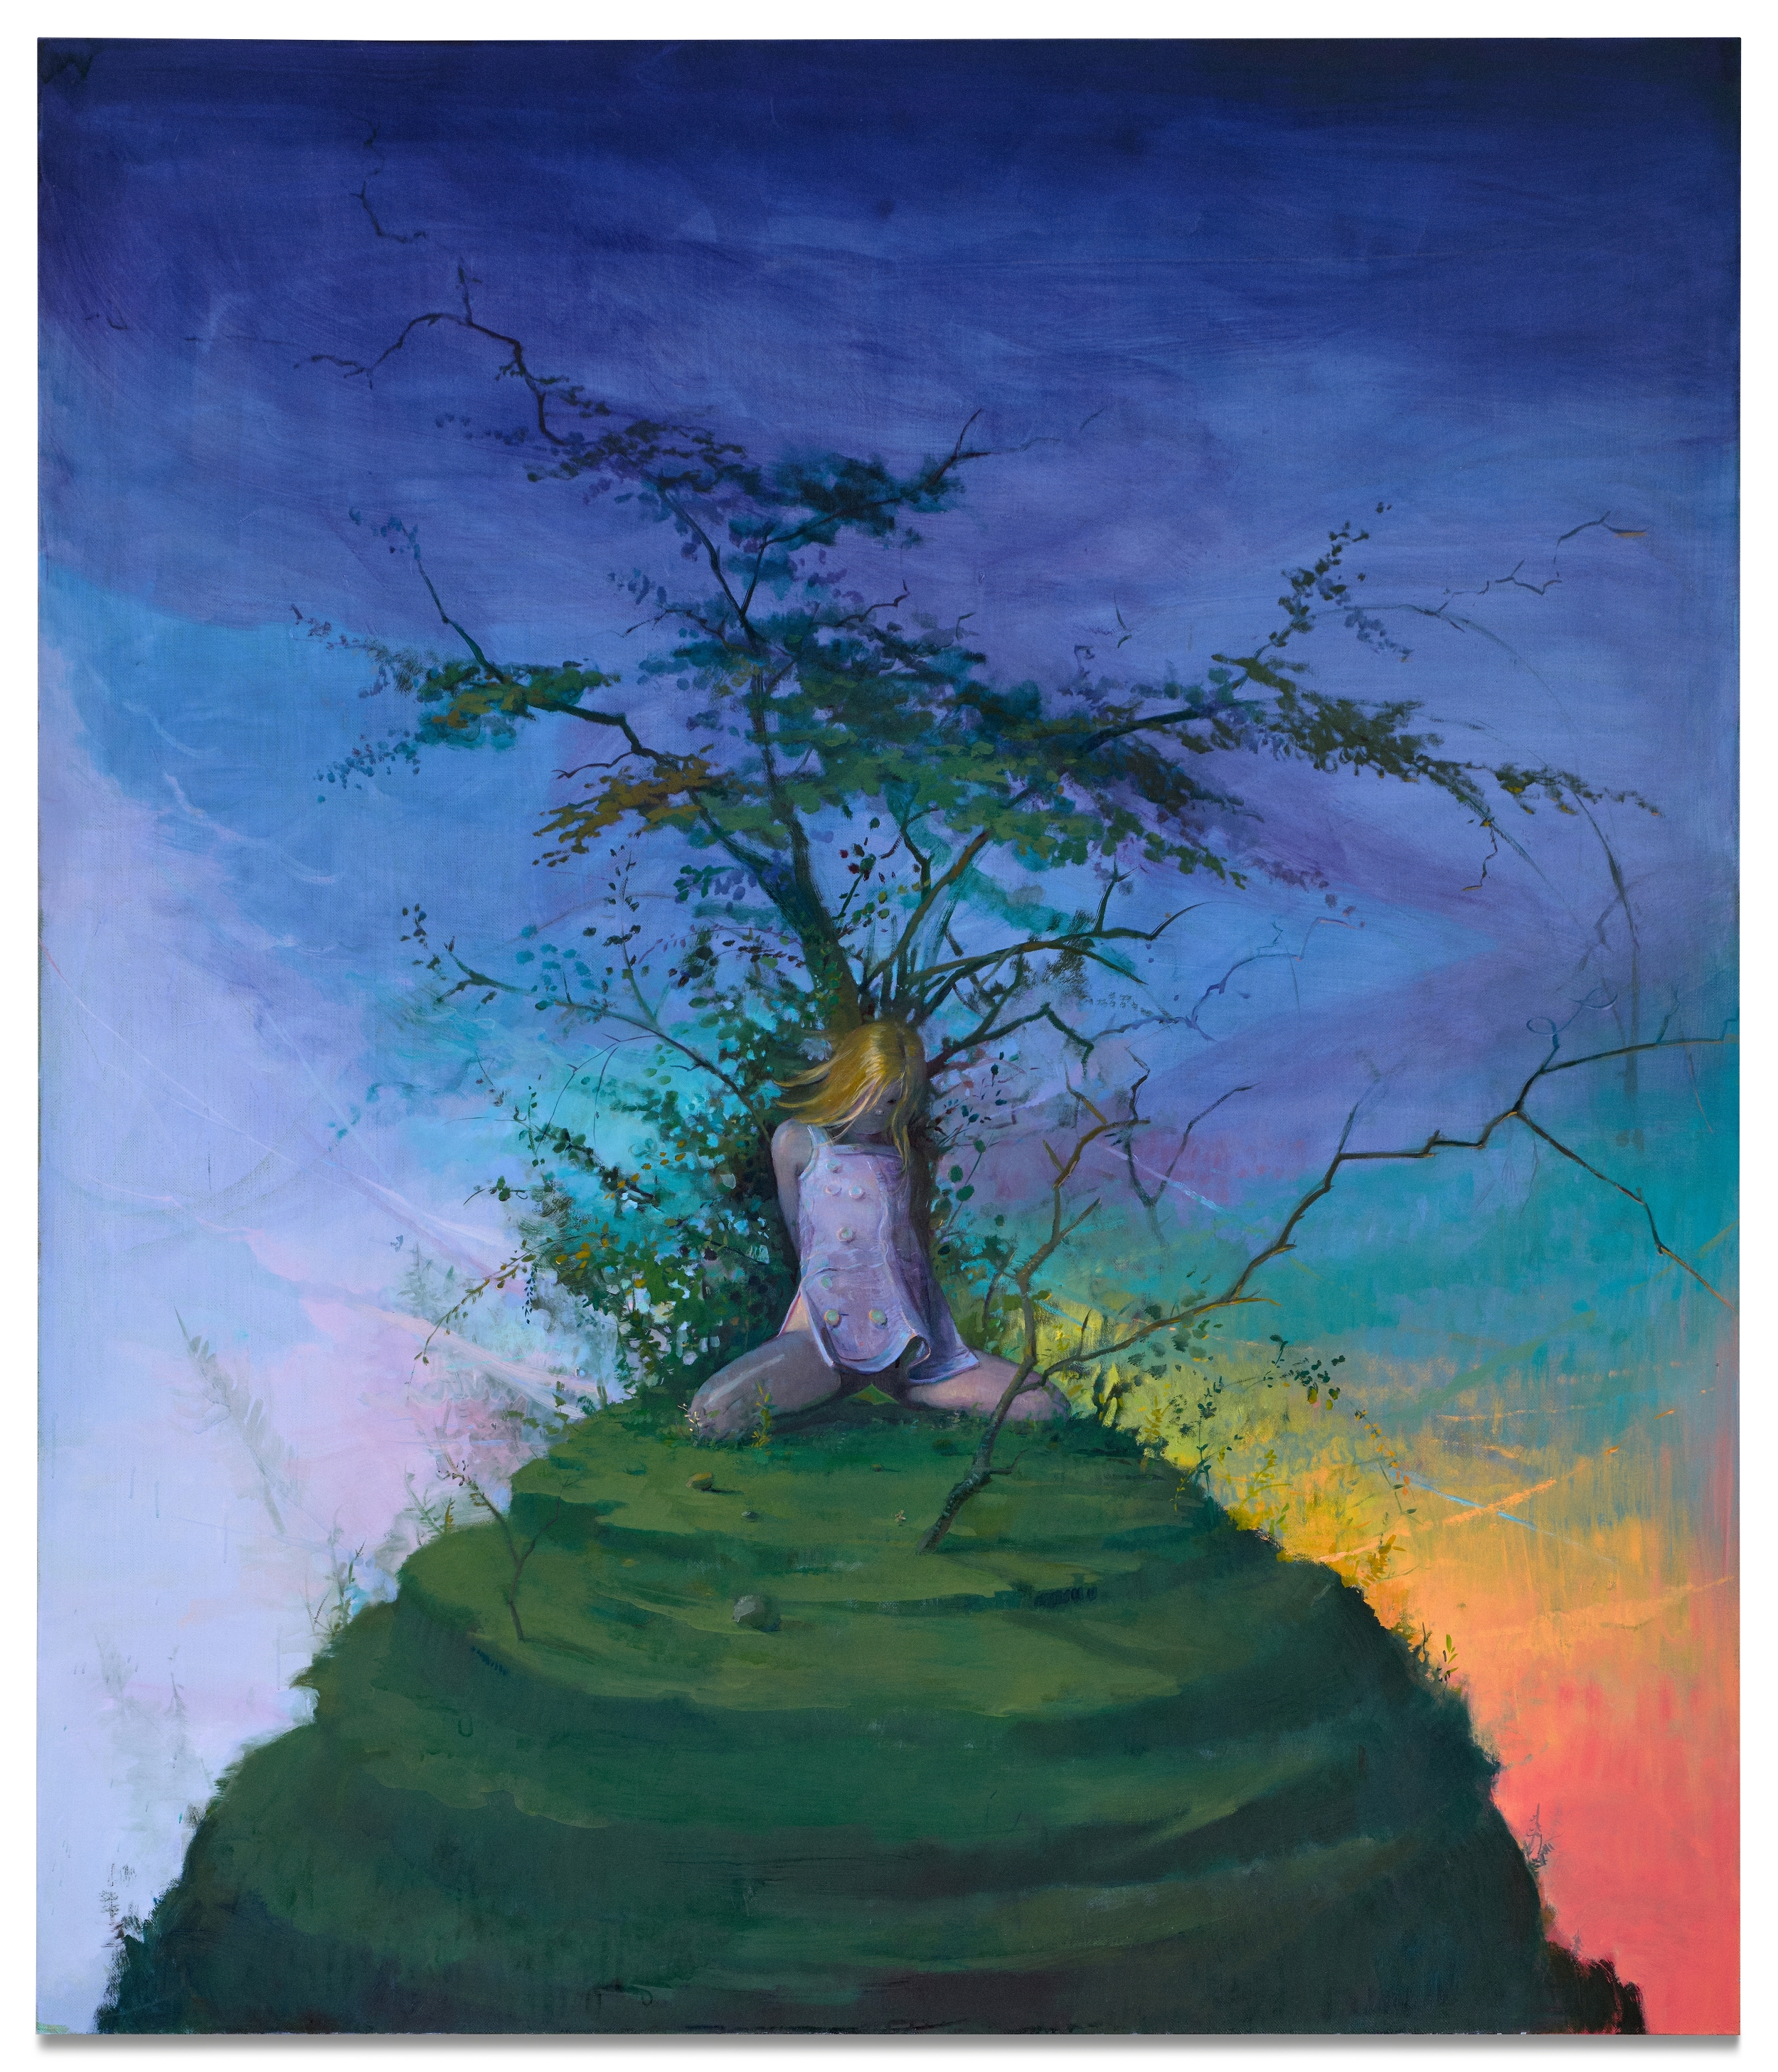 The Mound by Lisa Yuskavage, dated 2011